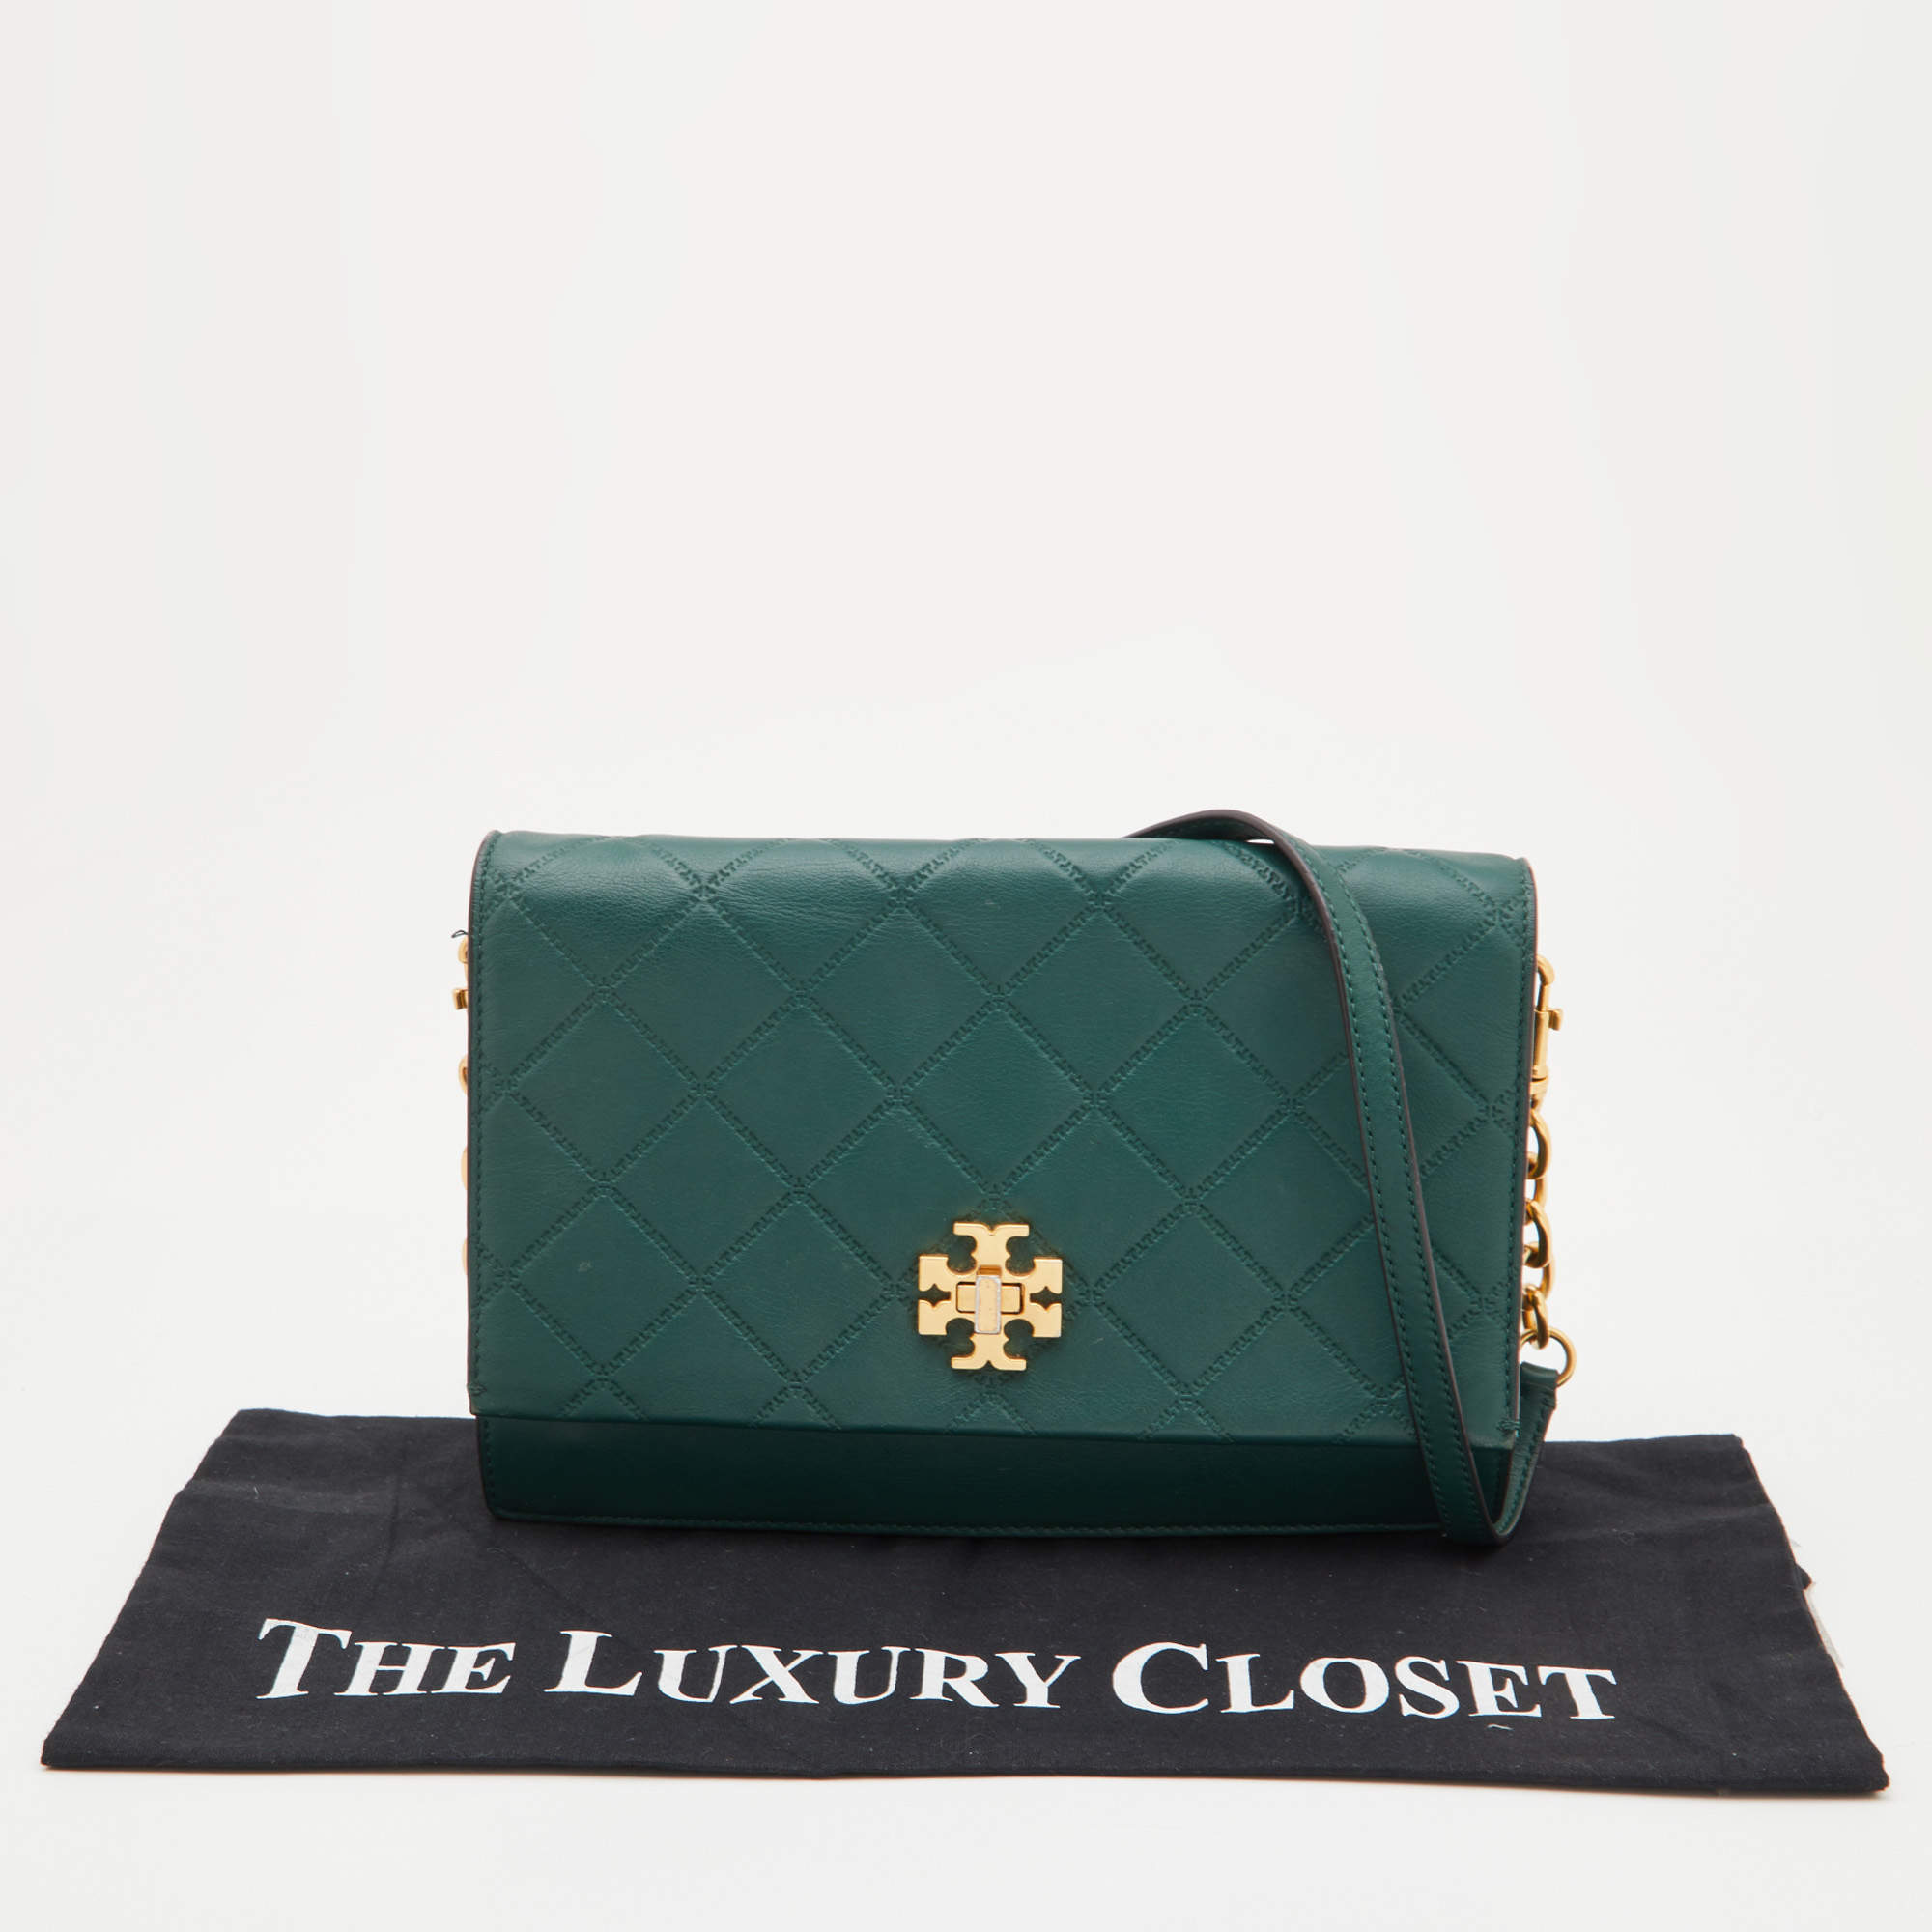 Leather crossbody bag Tory Burch Green in Leather - 24955766